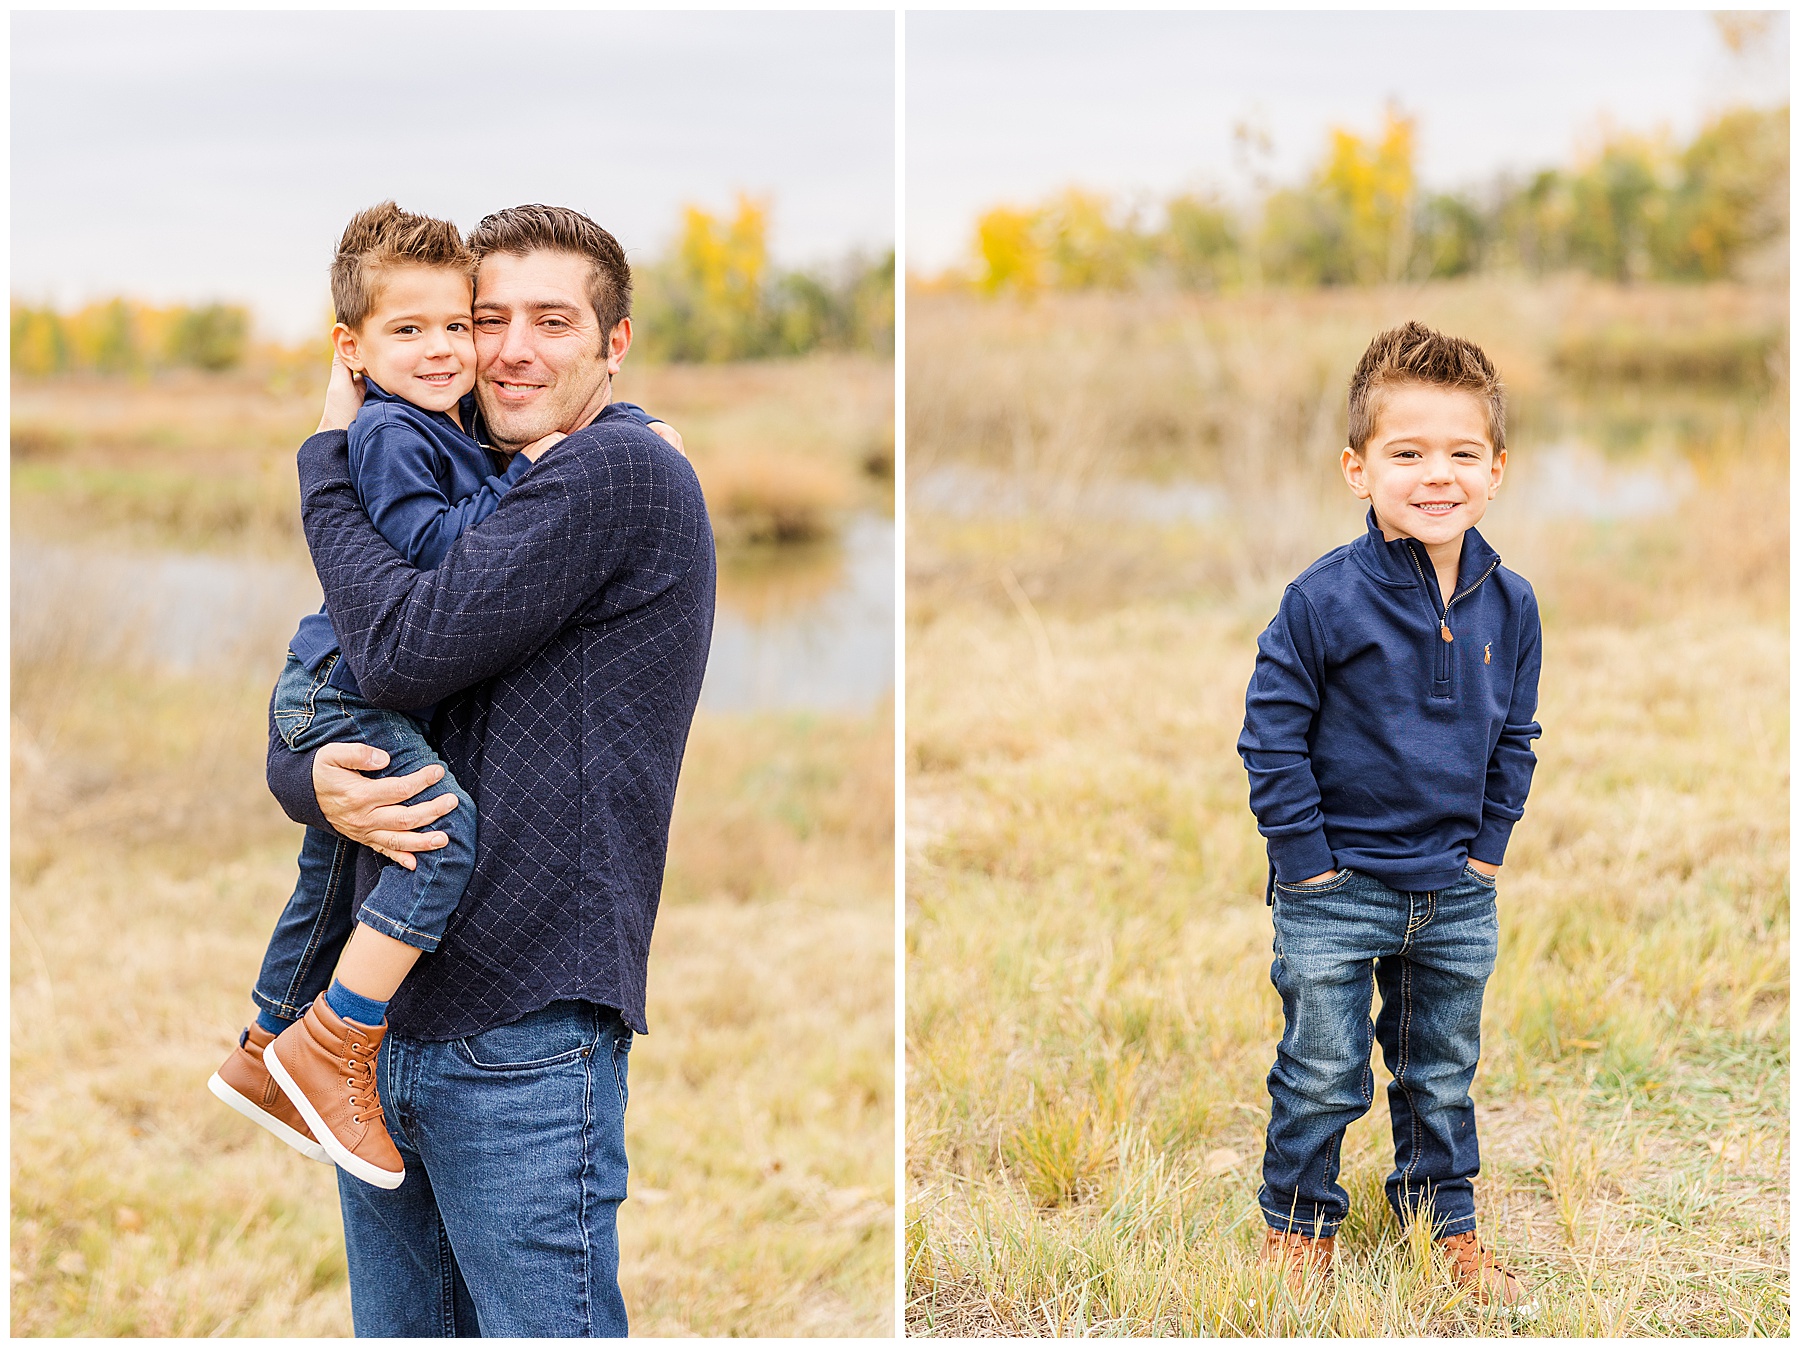 Catherine Chamberlain Photography captures Dad and son snuggling cheek to cheek